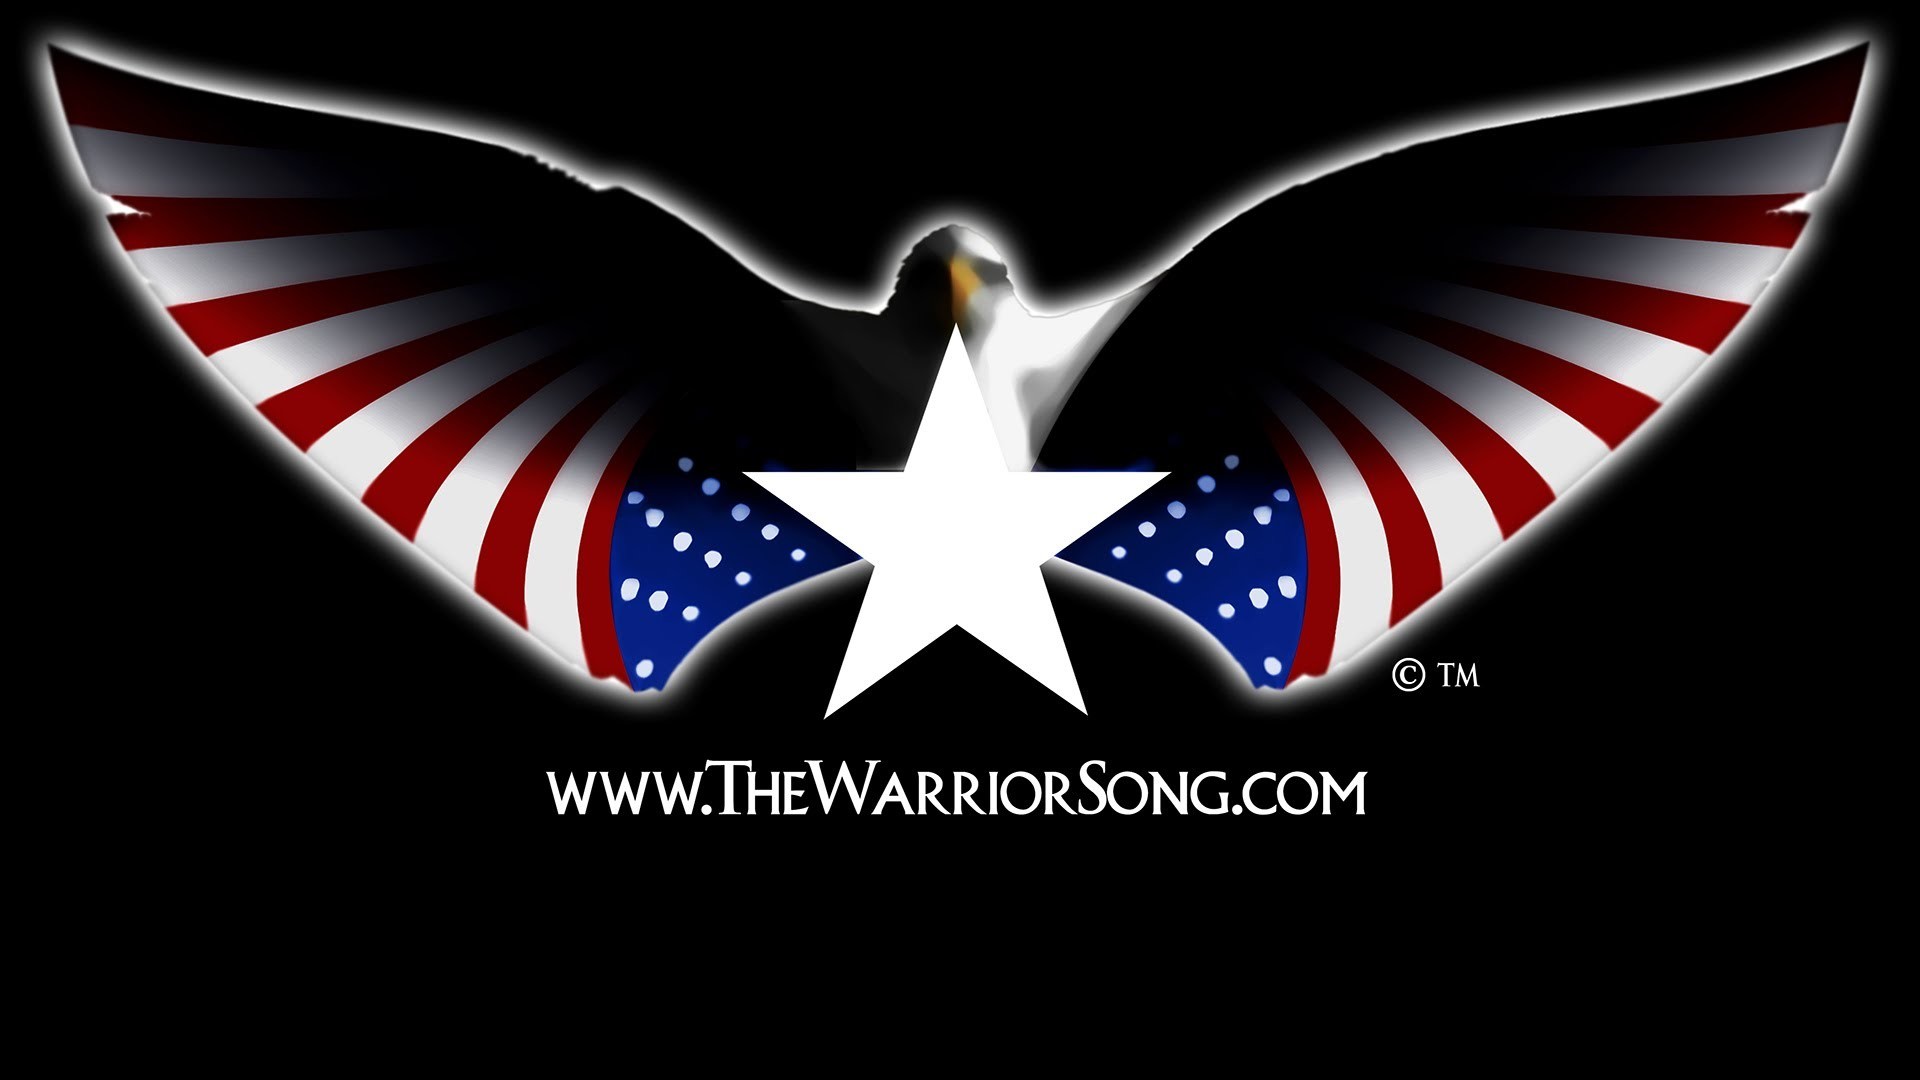 1920x1080 The Warrior Song Thank you to all - Army, Navy, Marine Corps, Air